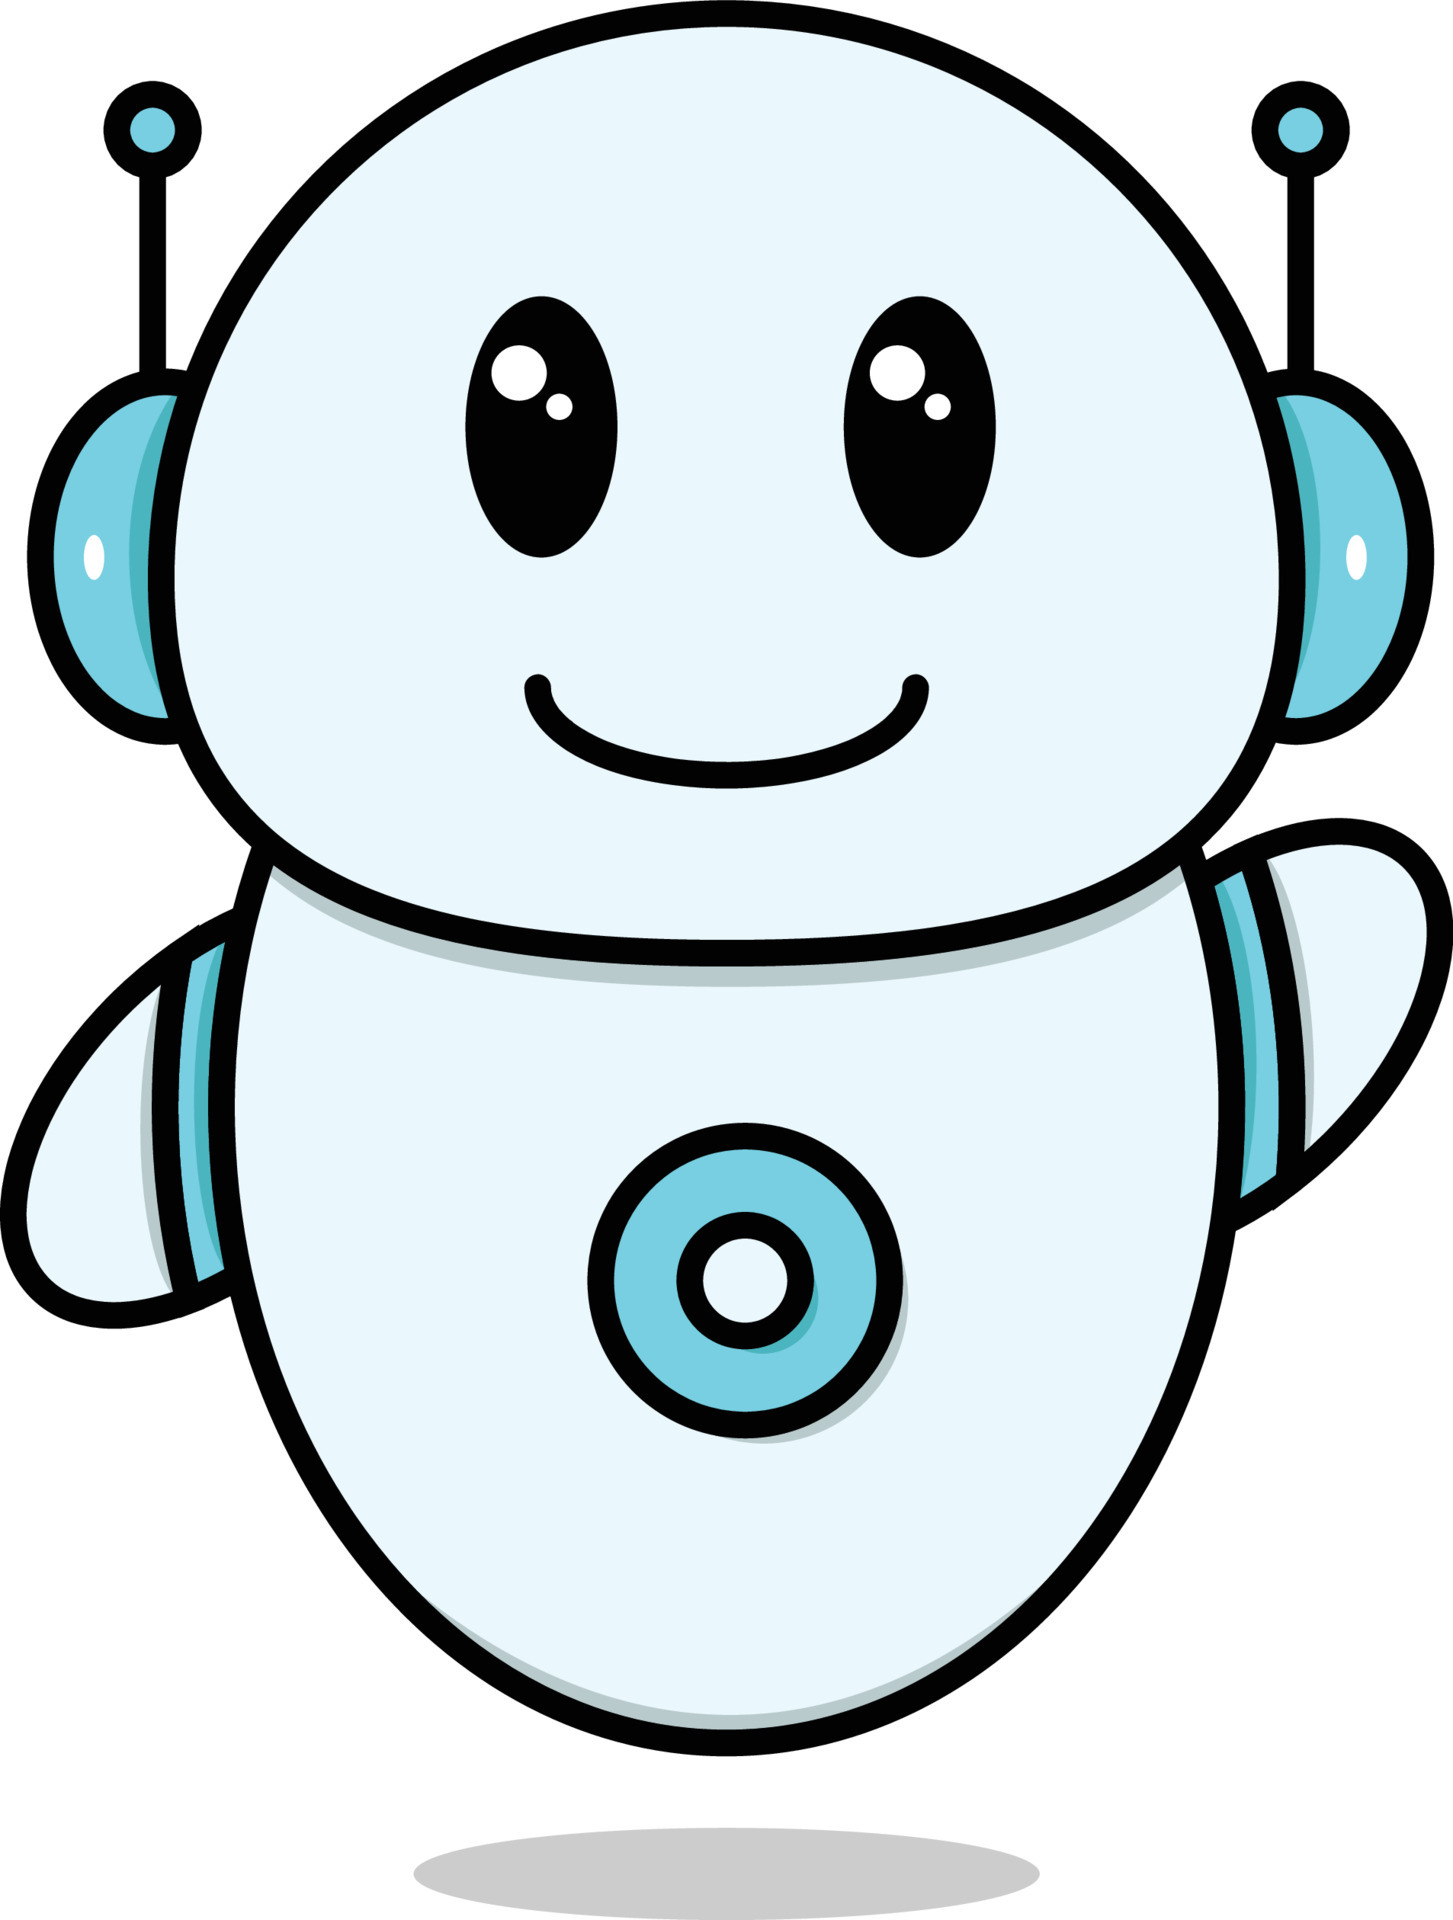 Cute Robot Vector Illustration with Happy Expression 5381497 ...